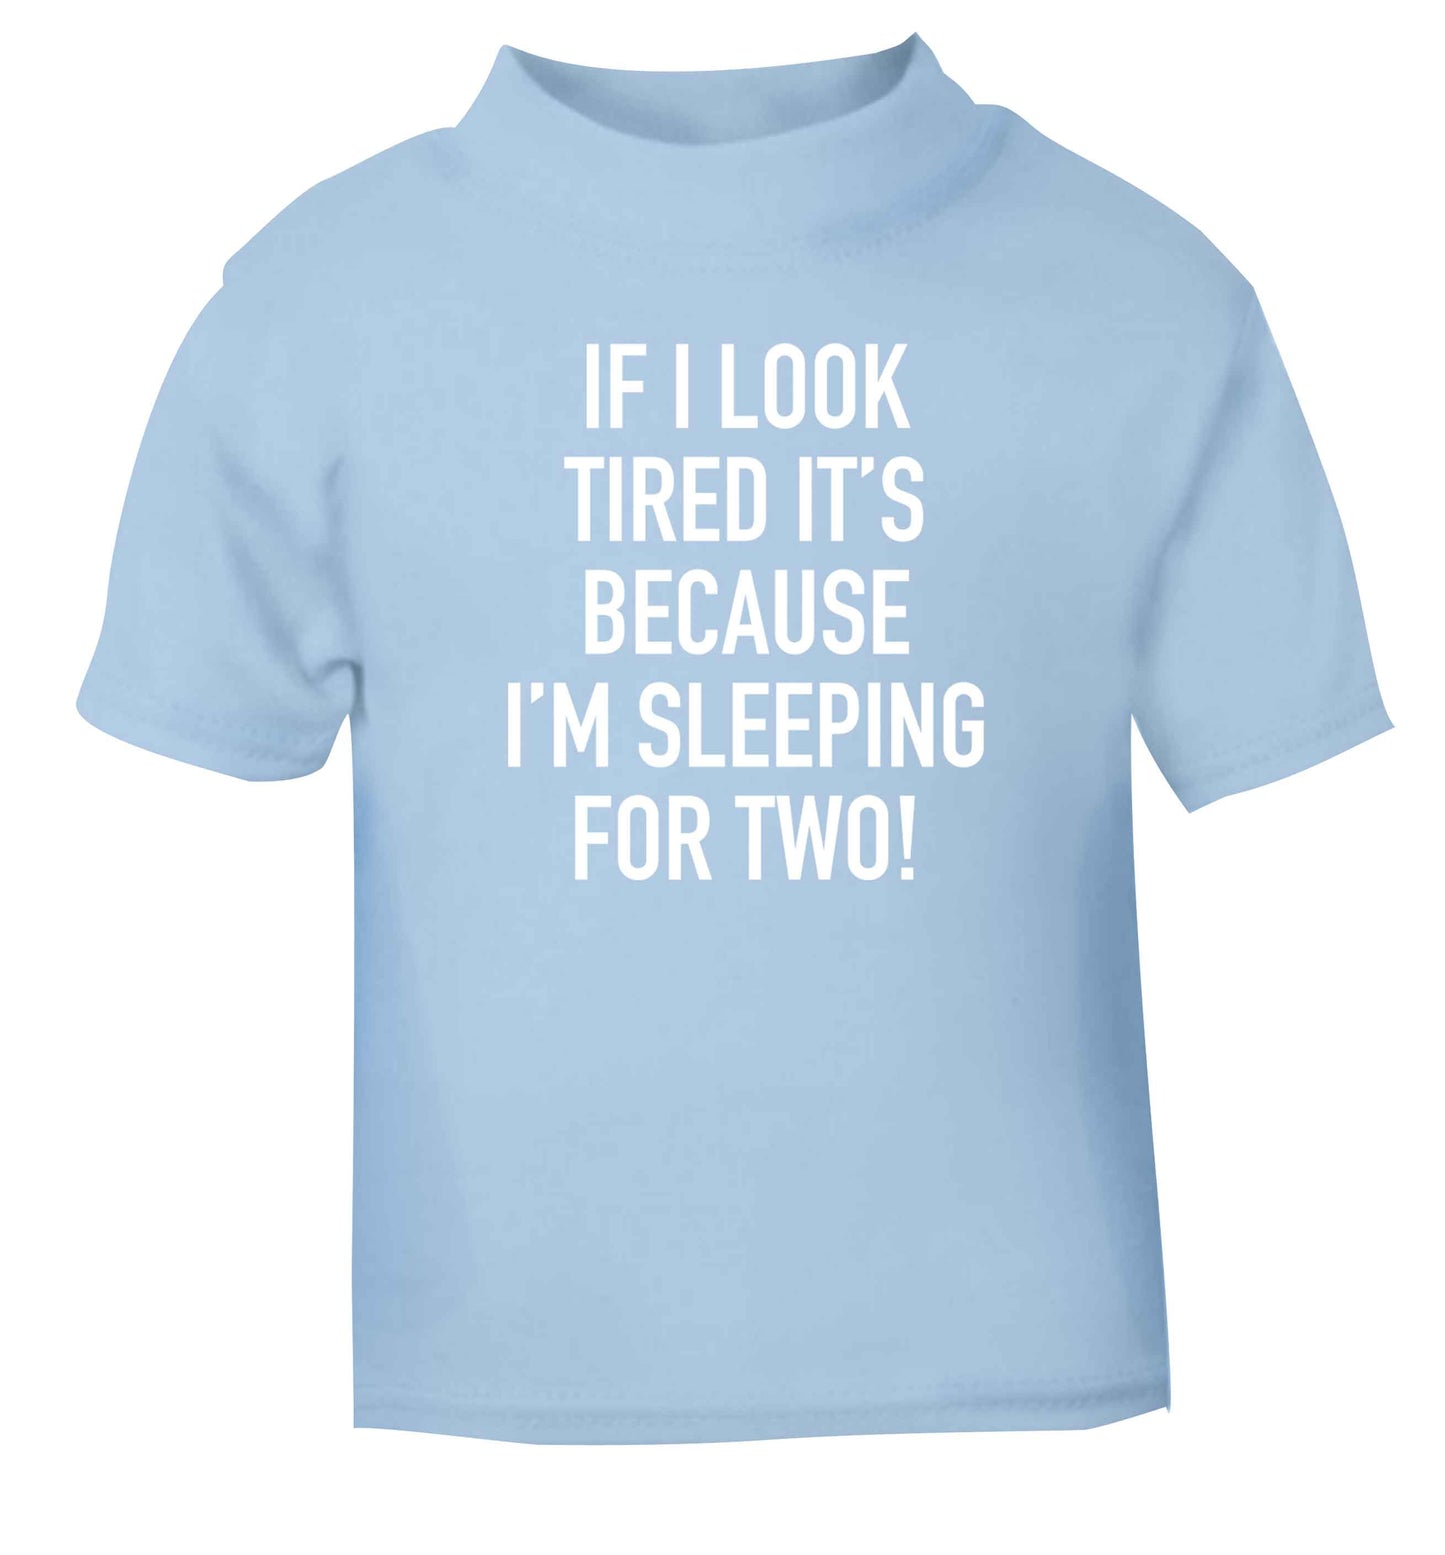 If I look tired it's because I'm sleeping for two light blue Baby Toddler Tshirt 2 Years